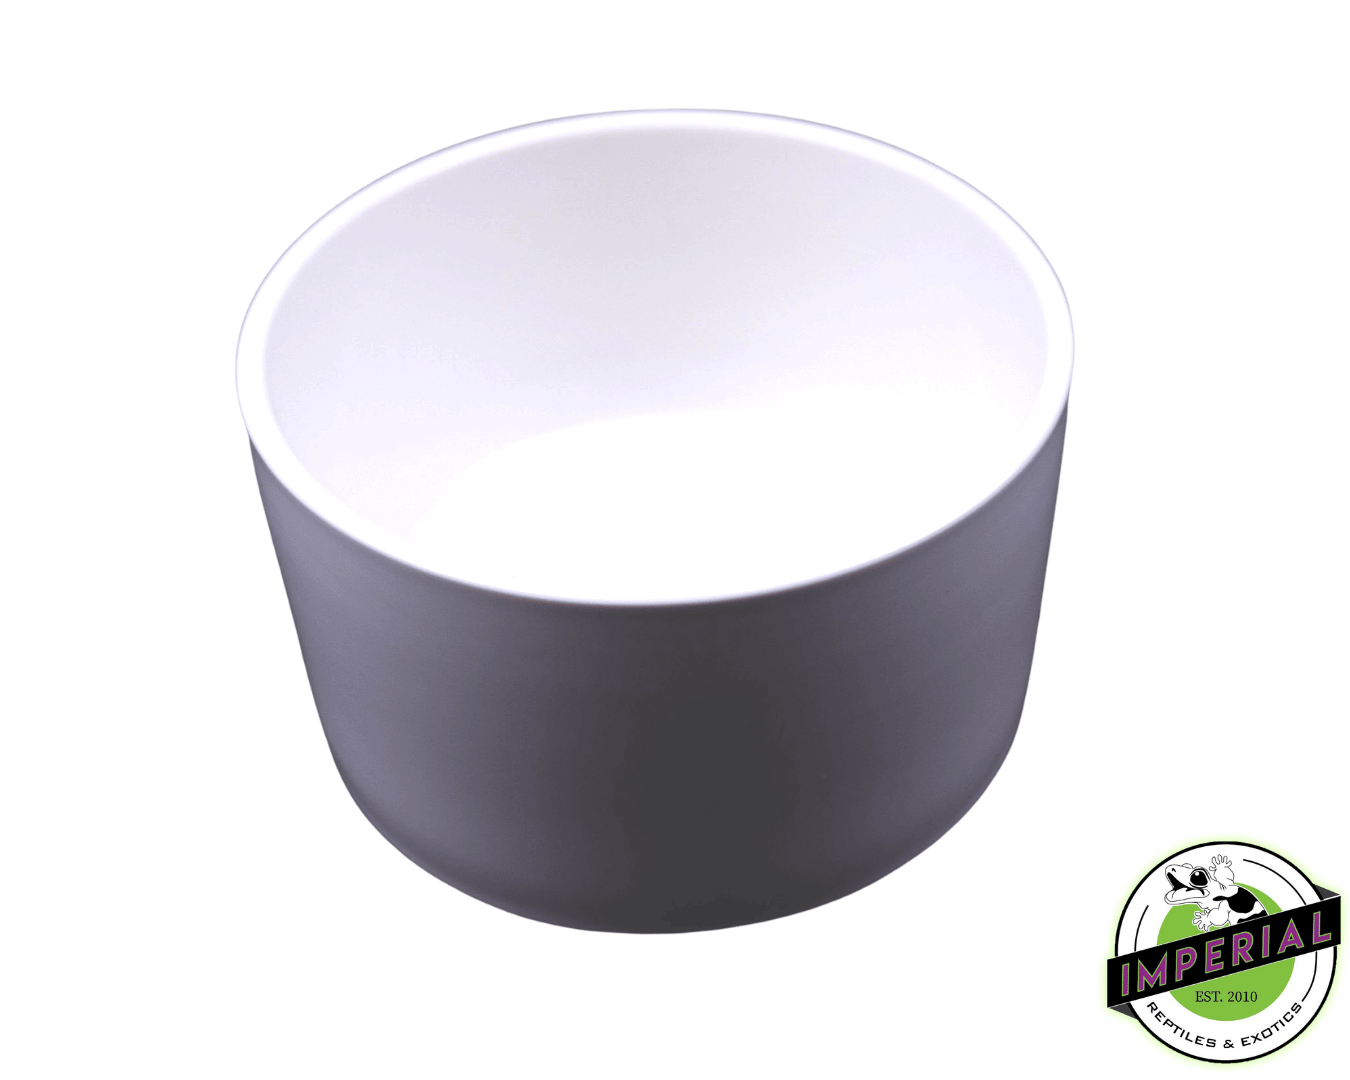 ceramic bowl for water and insects for sale online at cheap prices. These dishes are easily cleaned and perfect for reptile enclosures.